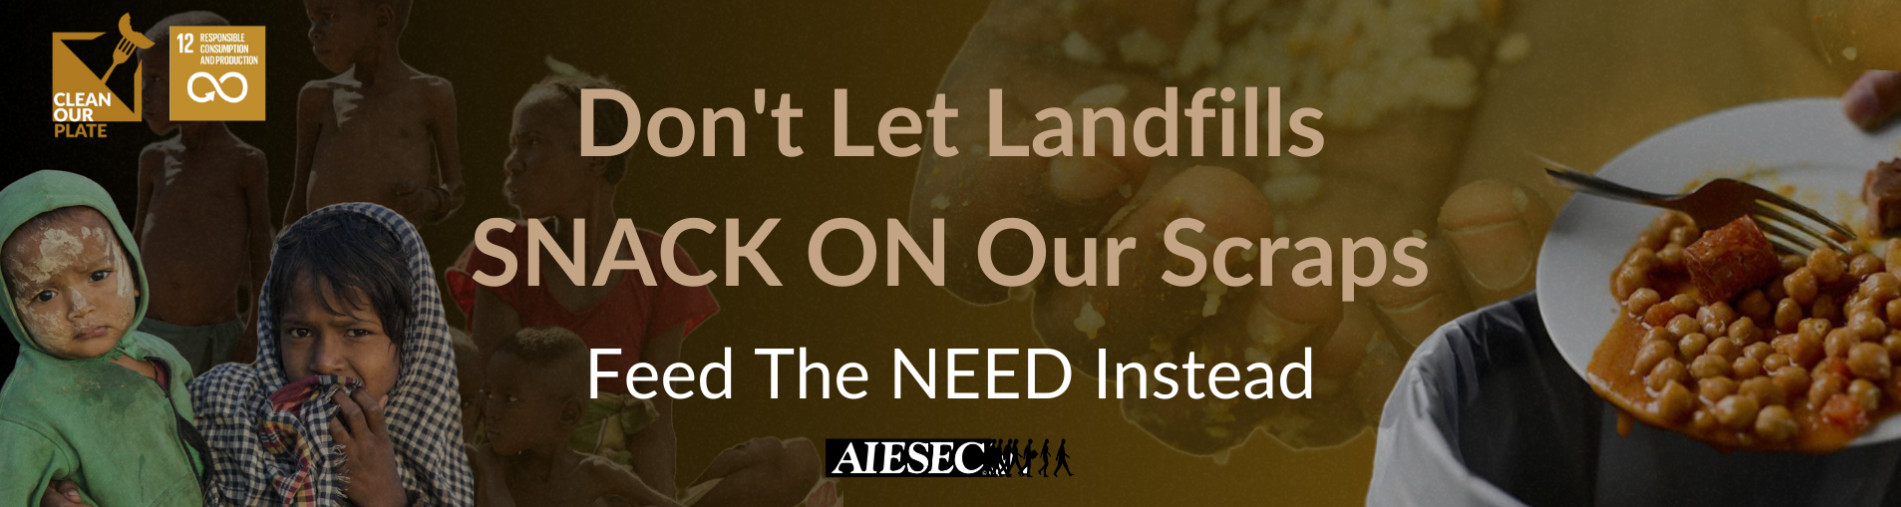 Don't Let Landfills SNACK ON Our Scraps – FEED the NEED Instead!